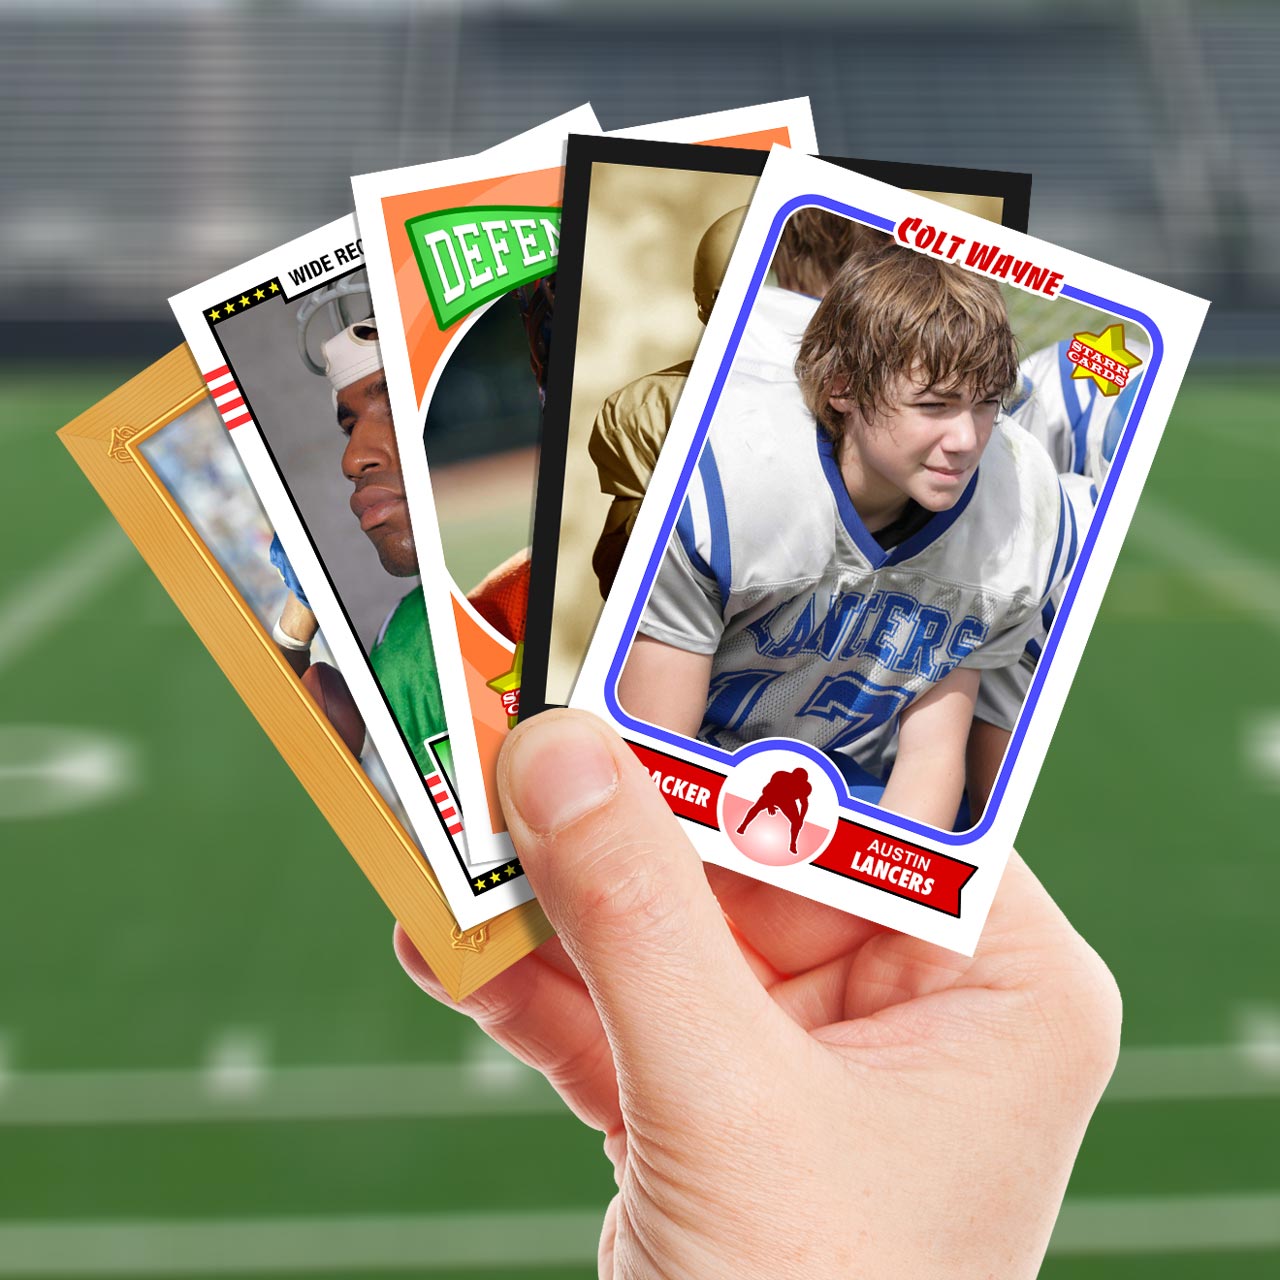 Make Your Own Football Card with Starr Cards